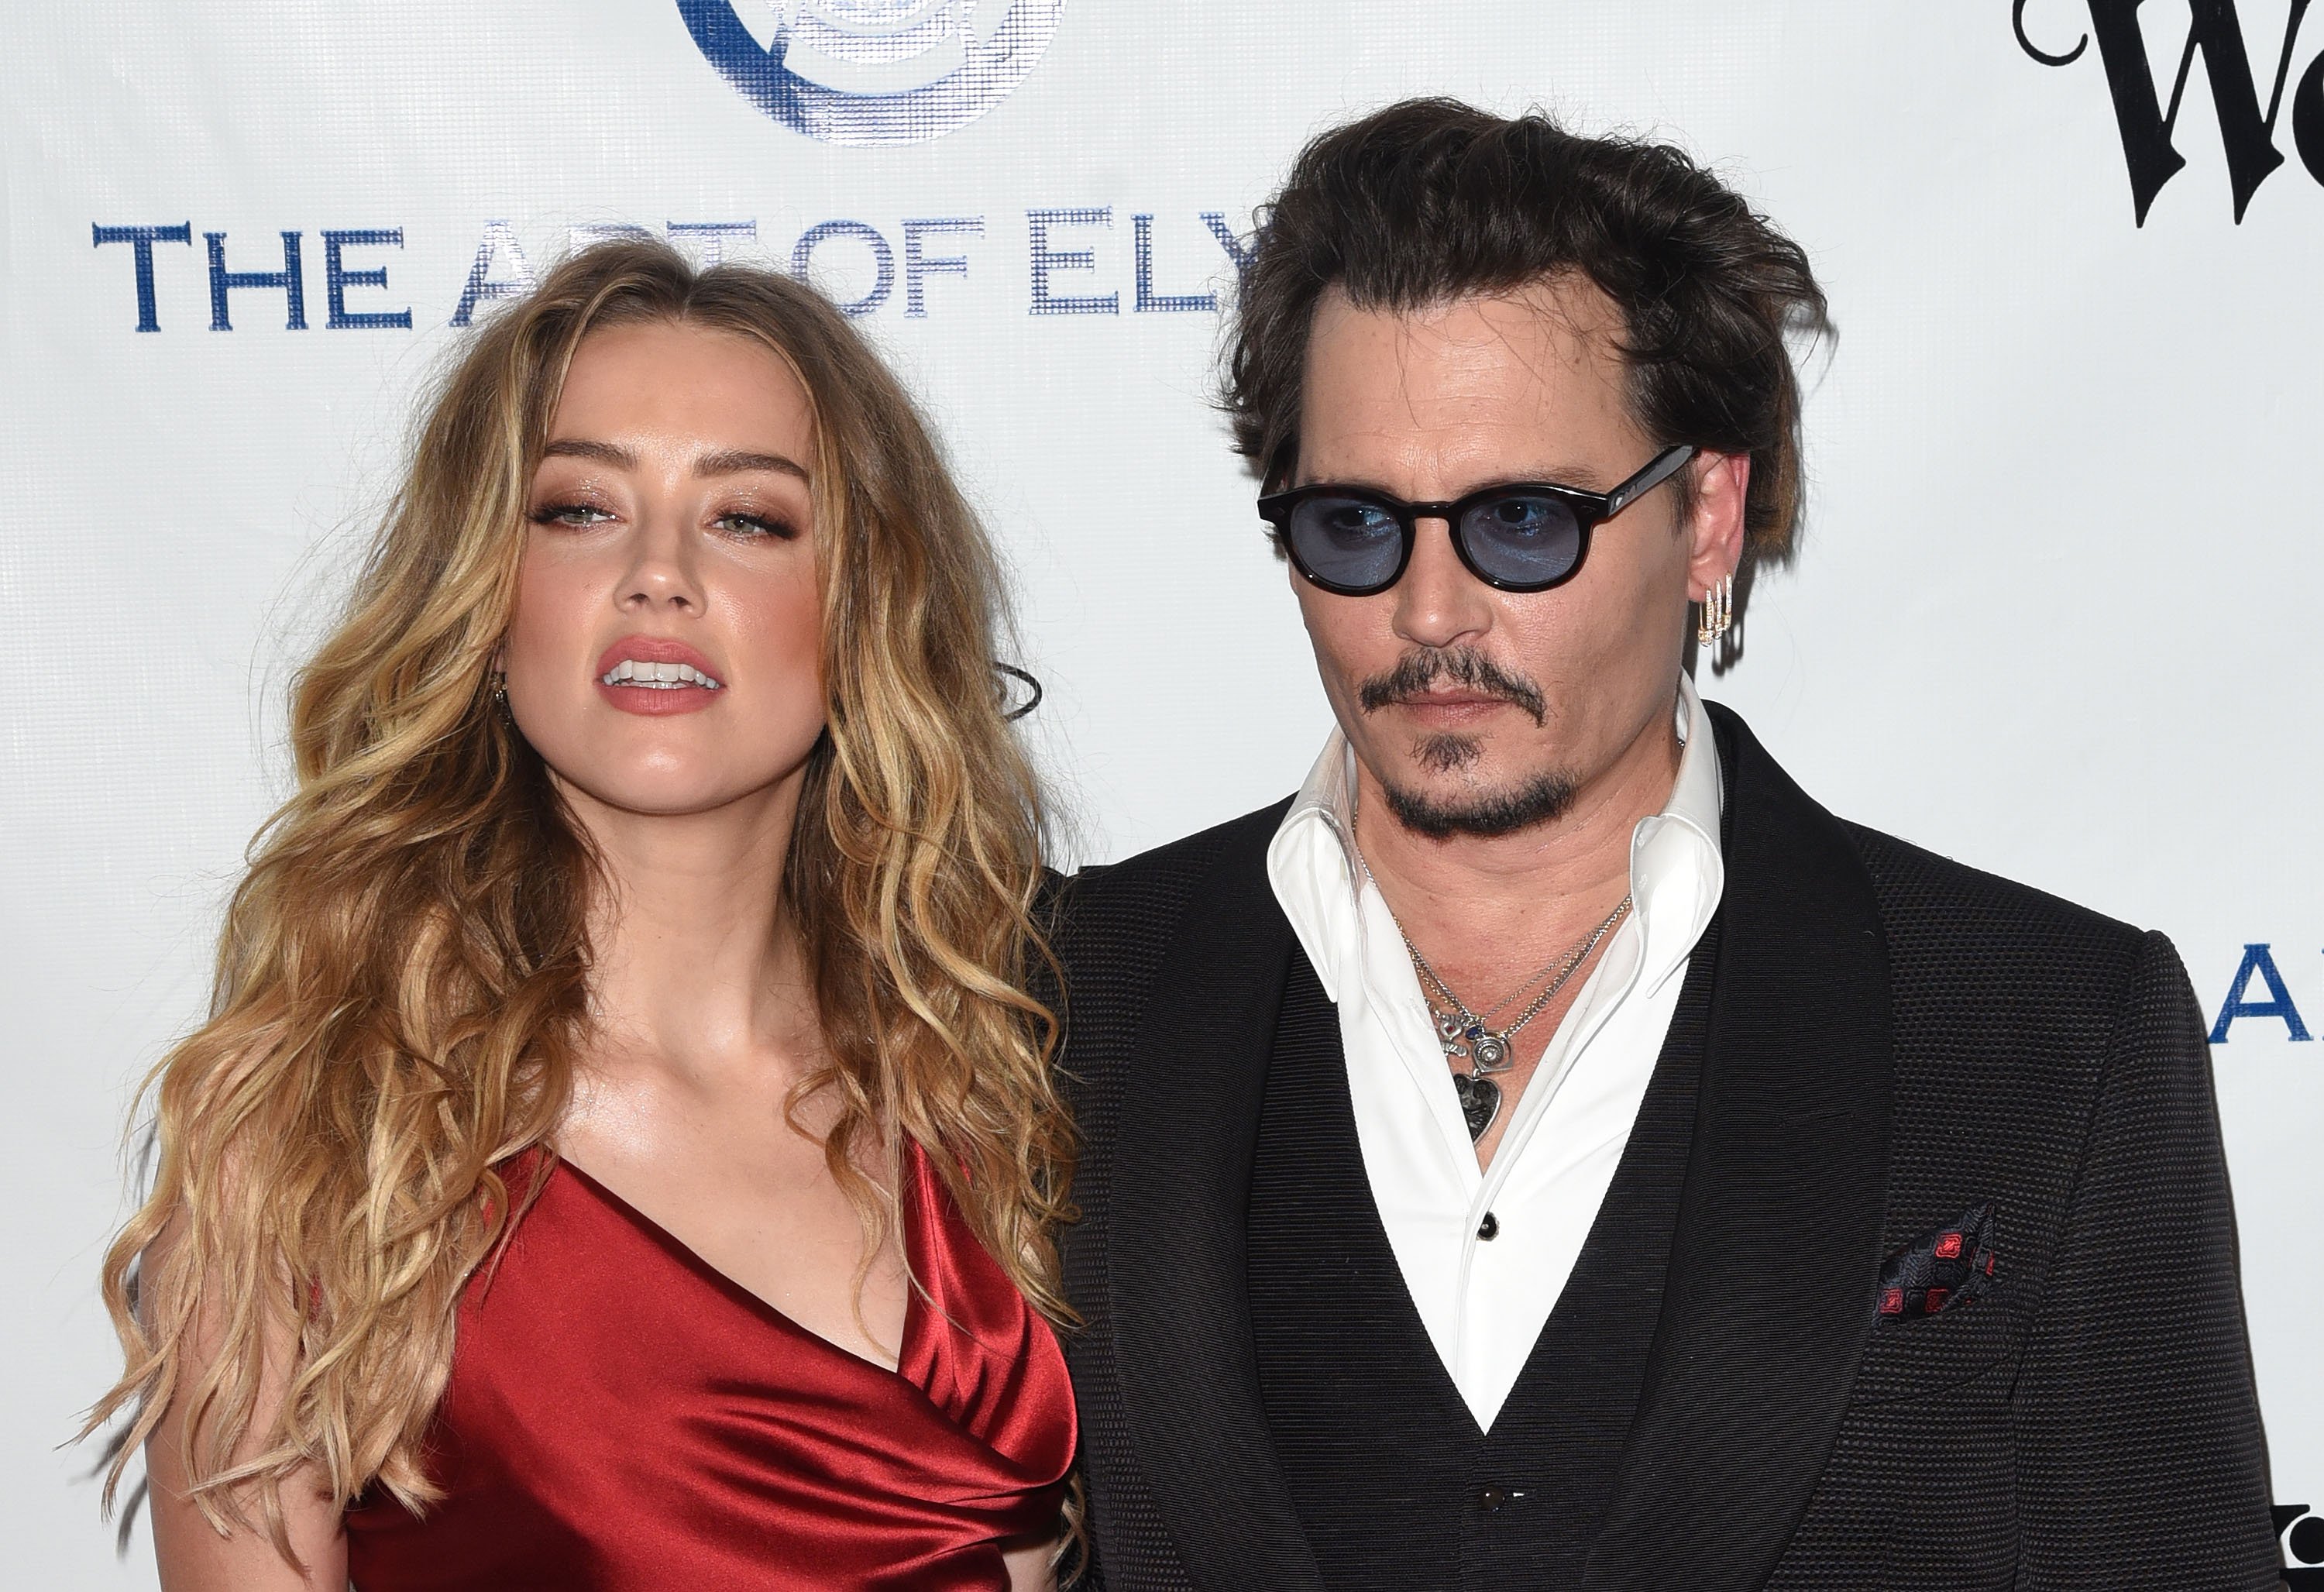 Amber Heard, who dated other famous people before and after her marriage to Johnny Depp, pose together at a gala in 2016